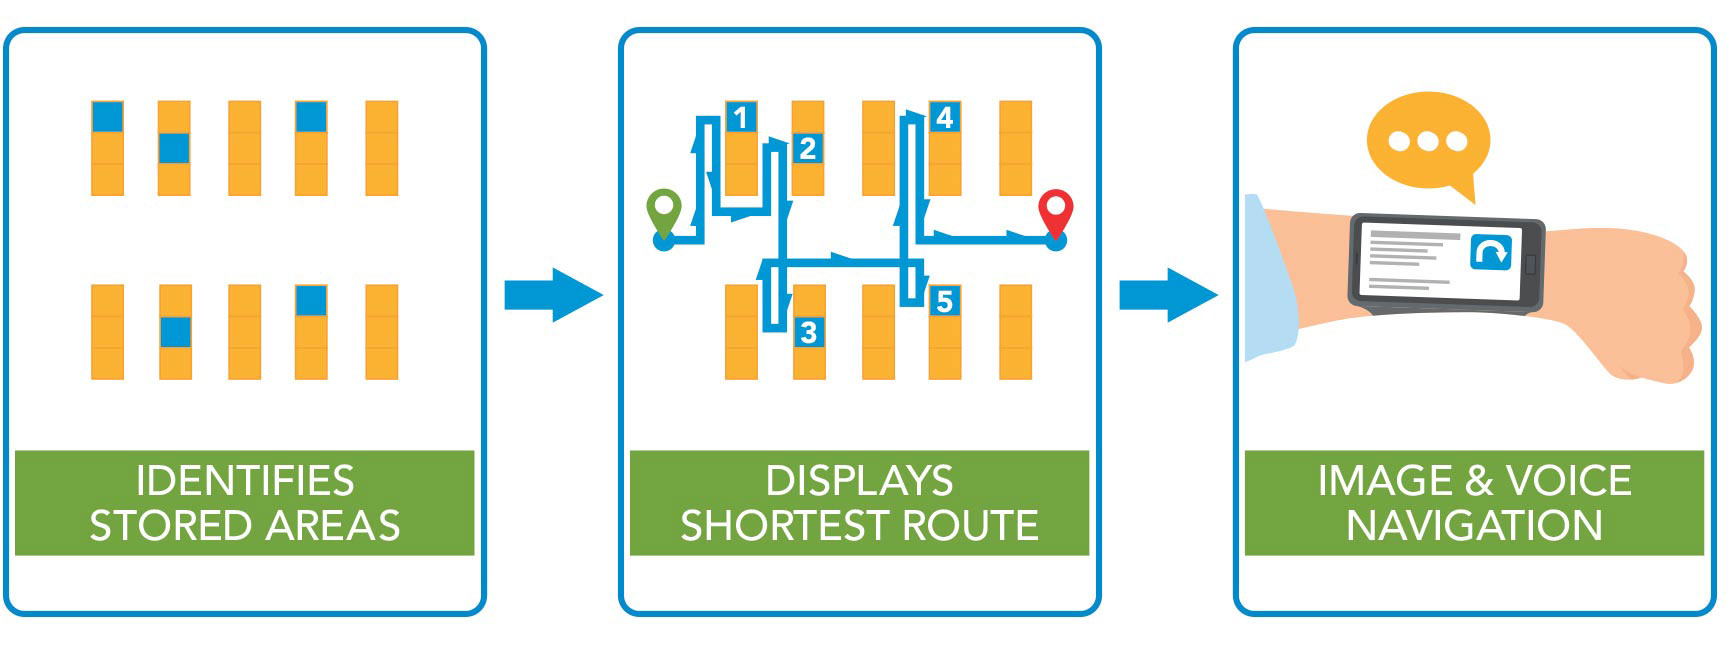 Identifies stored areas > Displays shortest route > Image & voice navigation